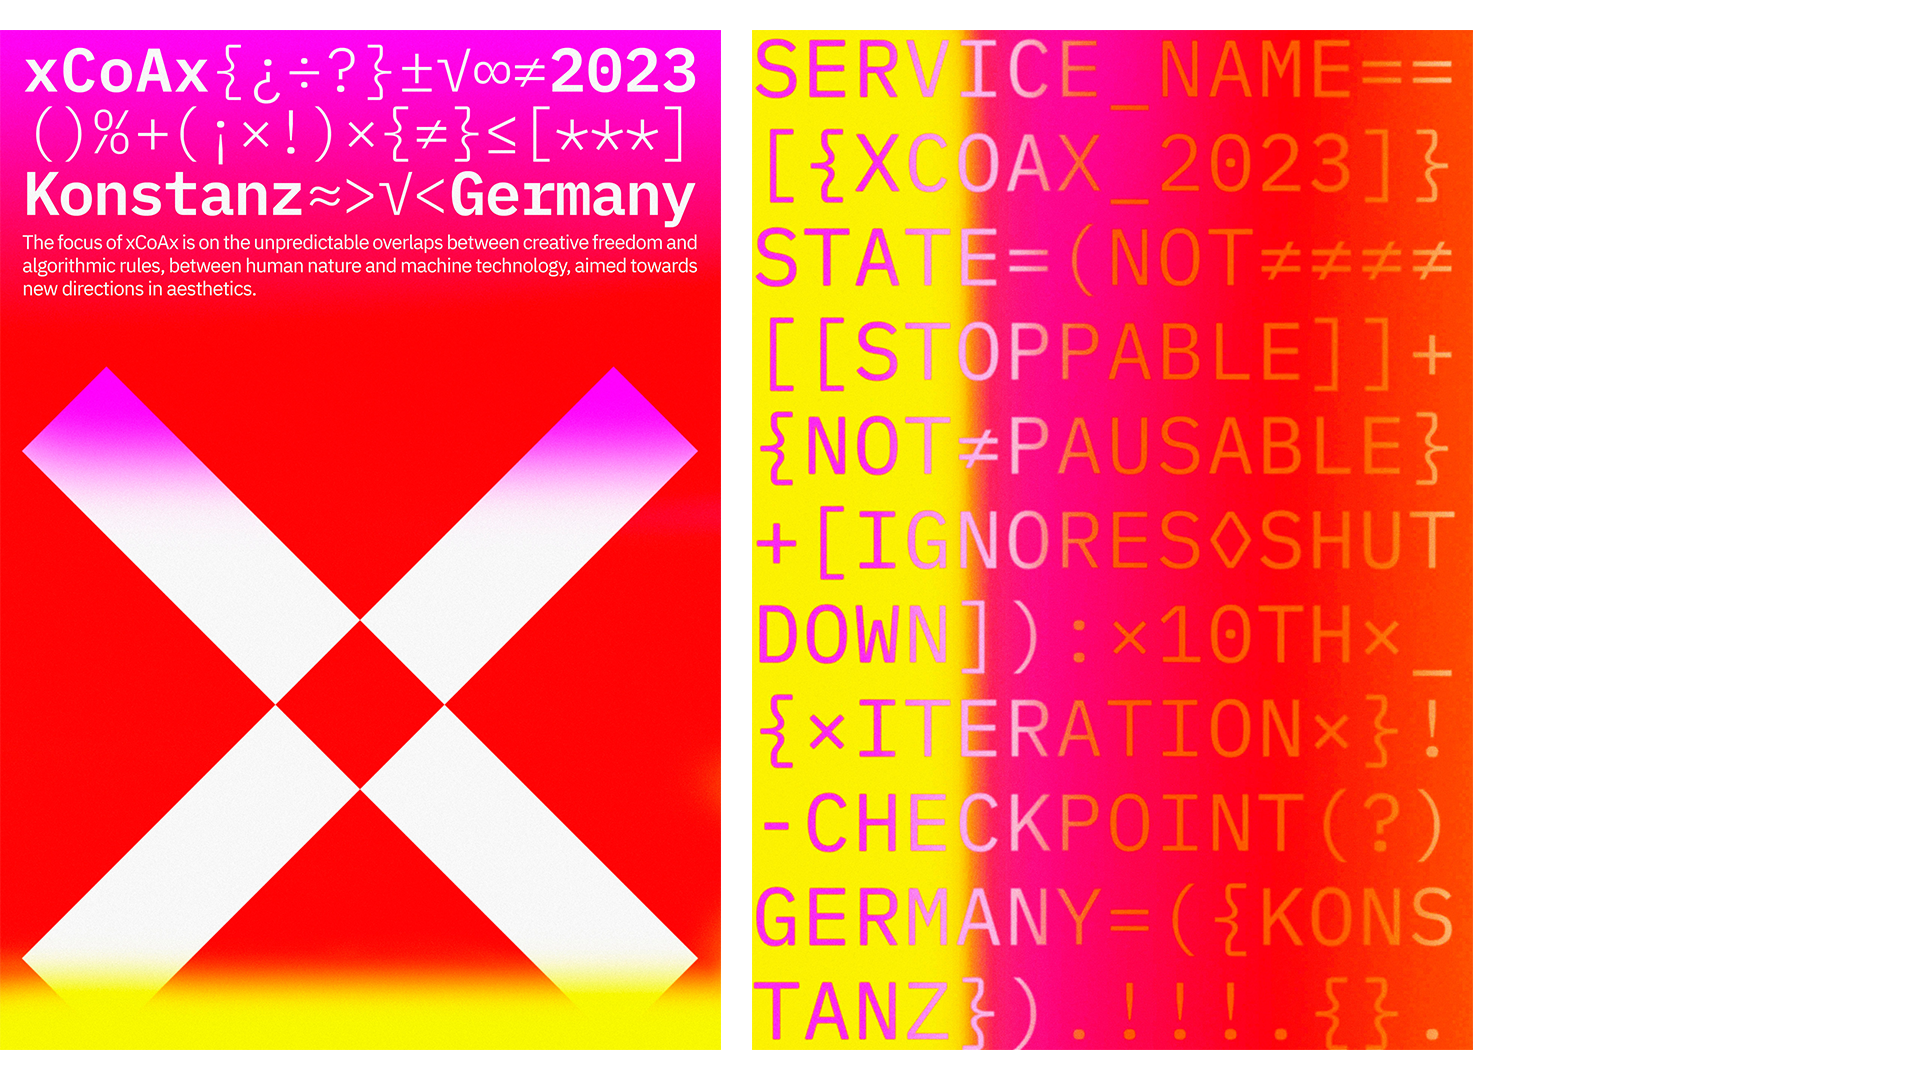 xCoAx 2023 posters.